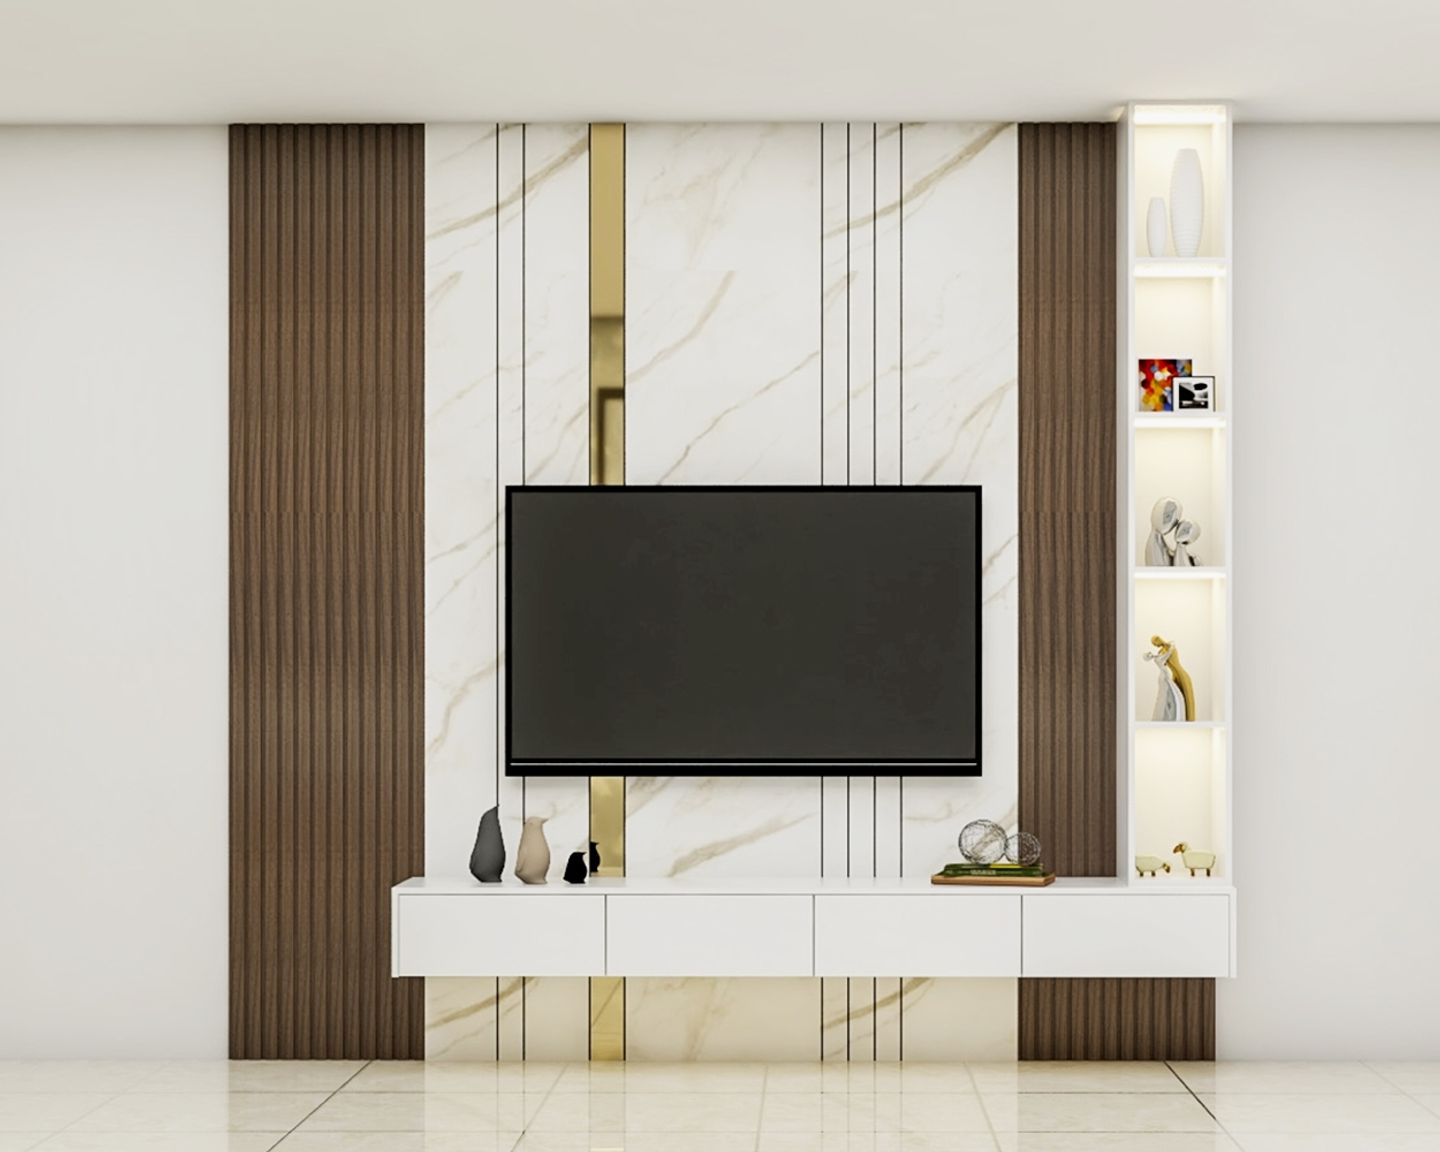 Frosty White TV Unit Design With Wooden Panel And Vertical Grooves - Livspace